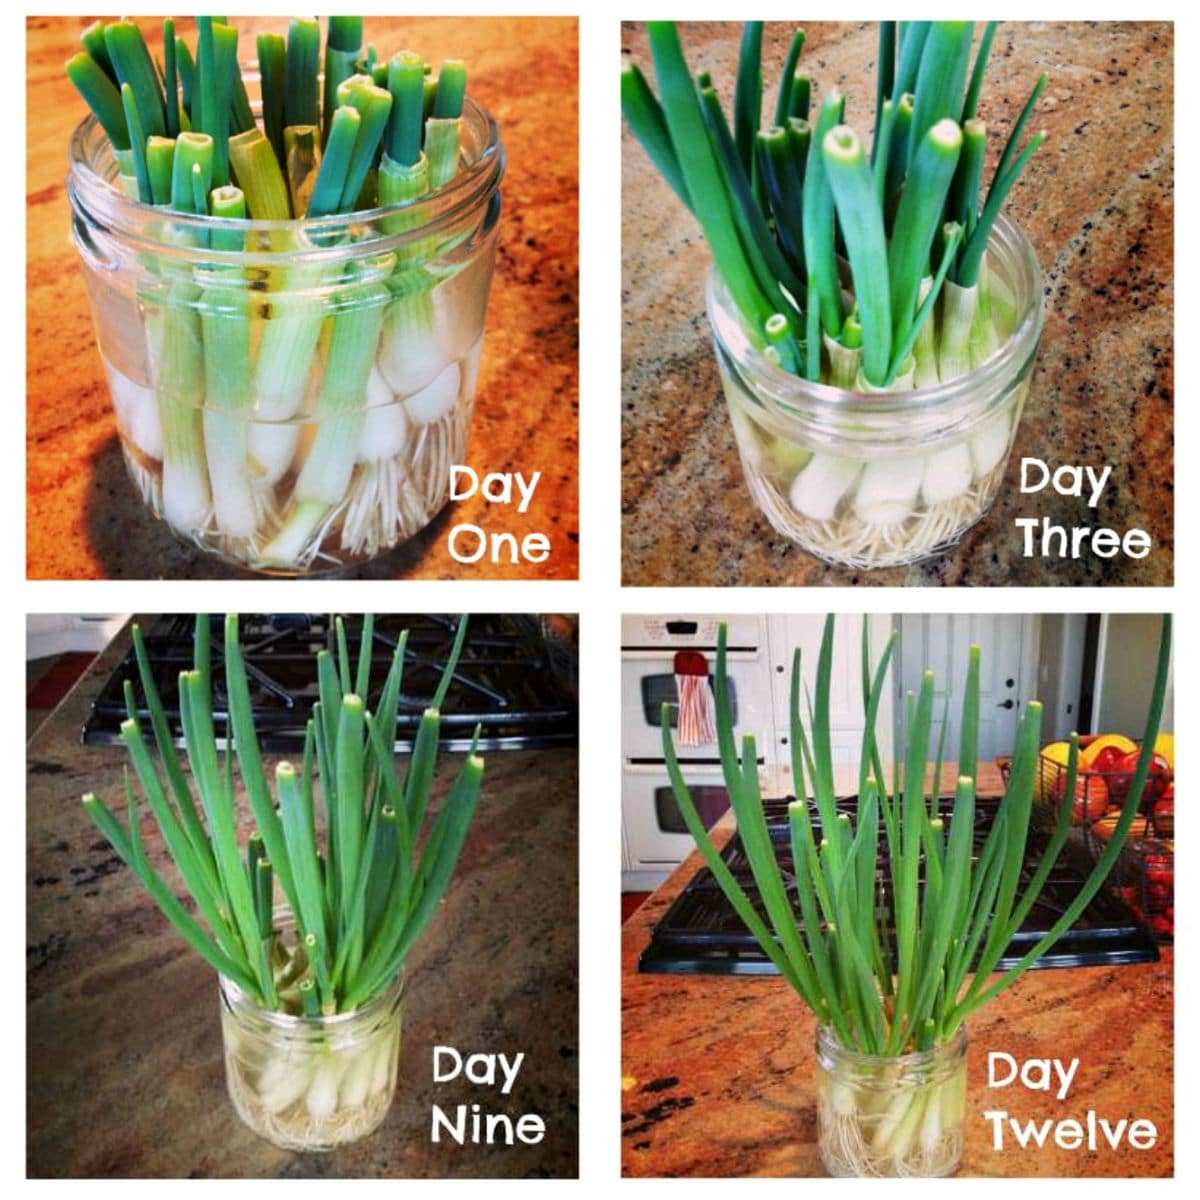 Square image for Growing Green Onions on the Countertop with collage of steps.